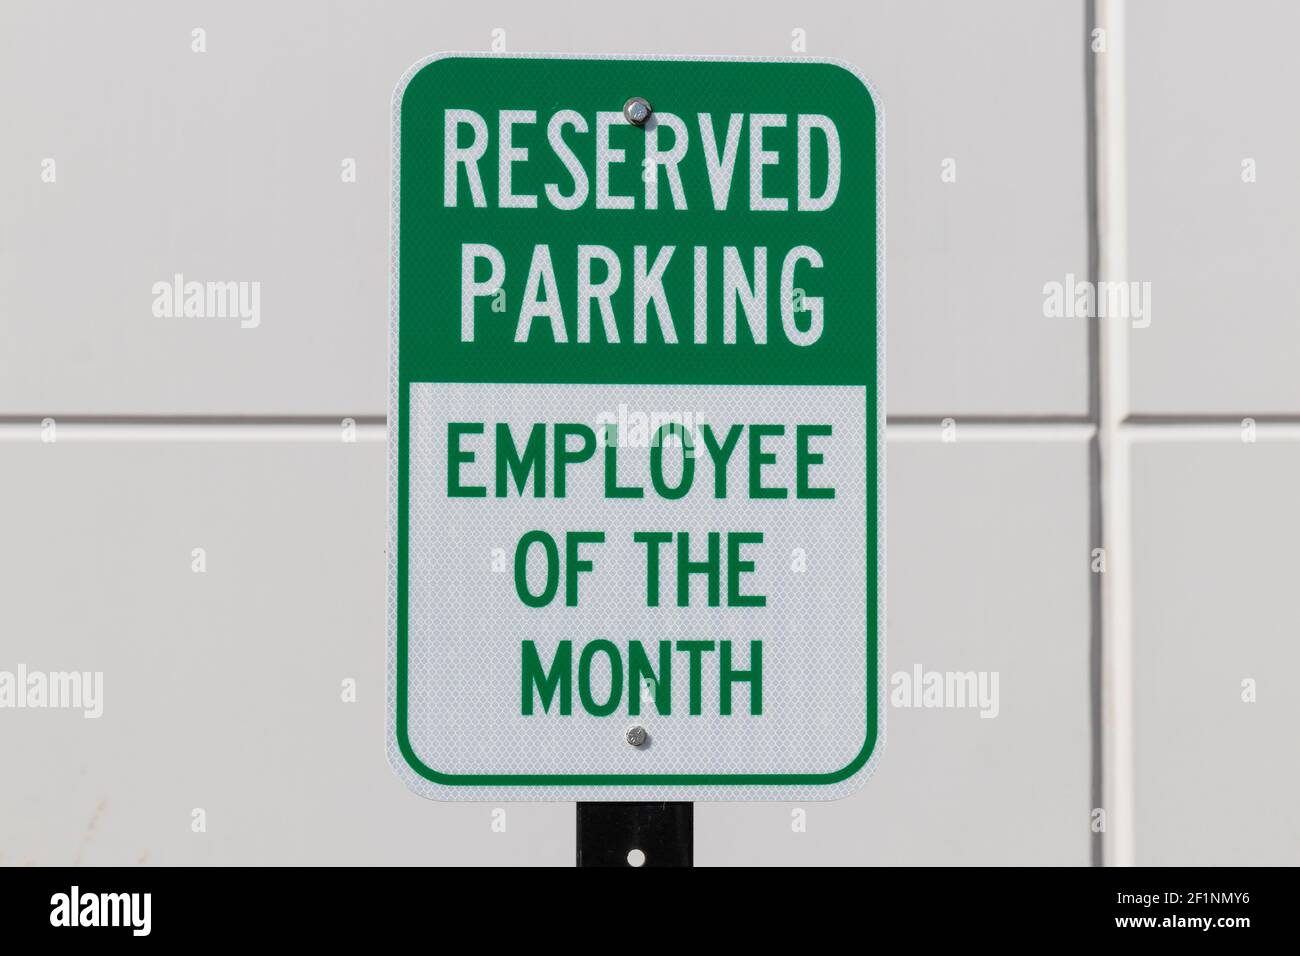 Reserved Parking for the Employee of the Month sign in white and green text. Stock Photo